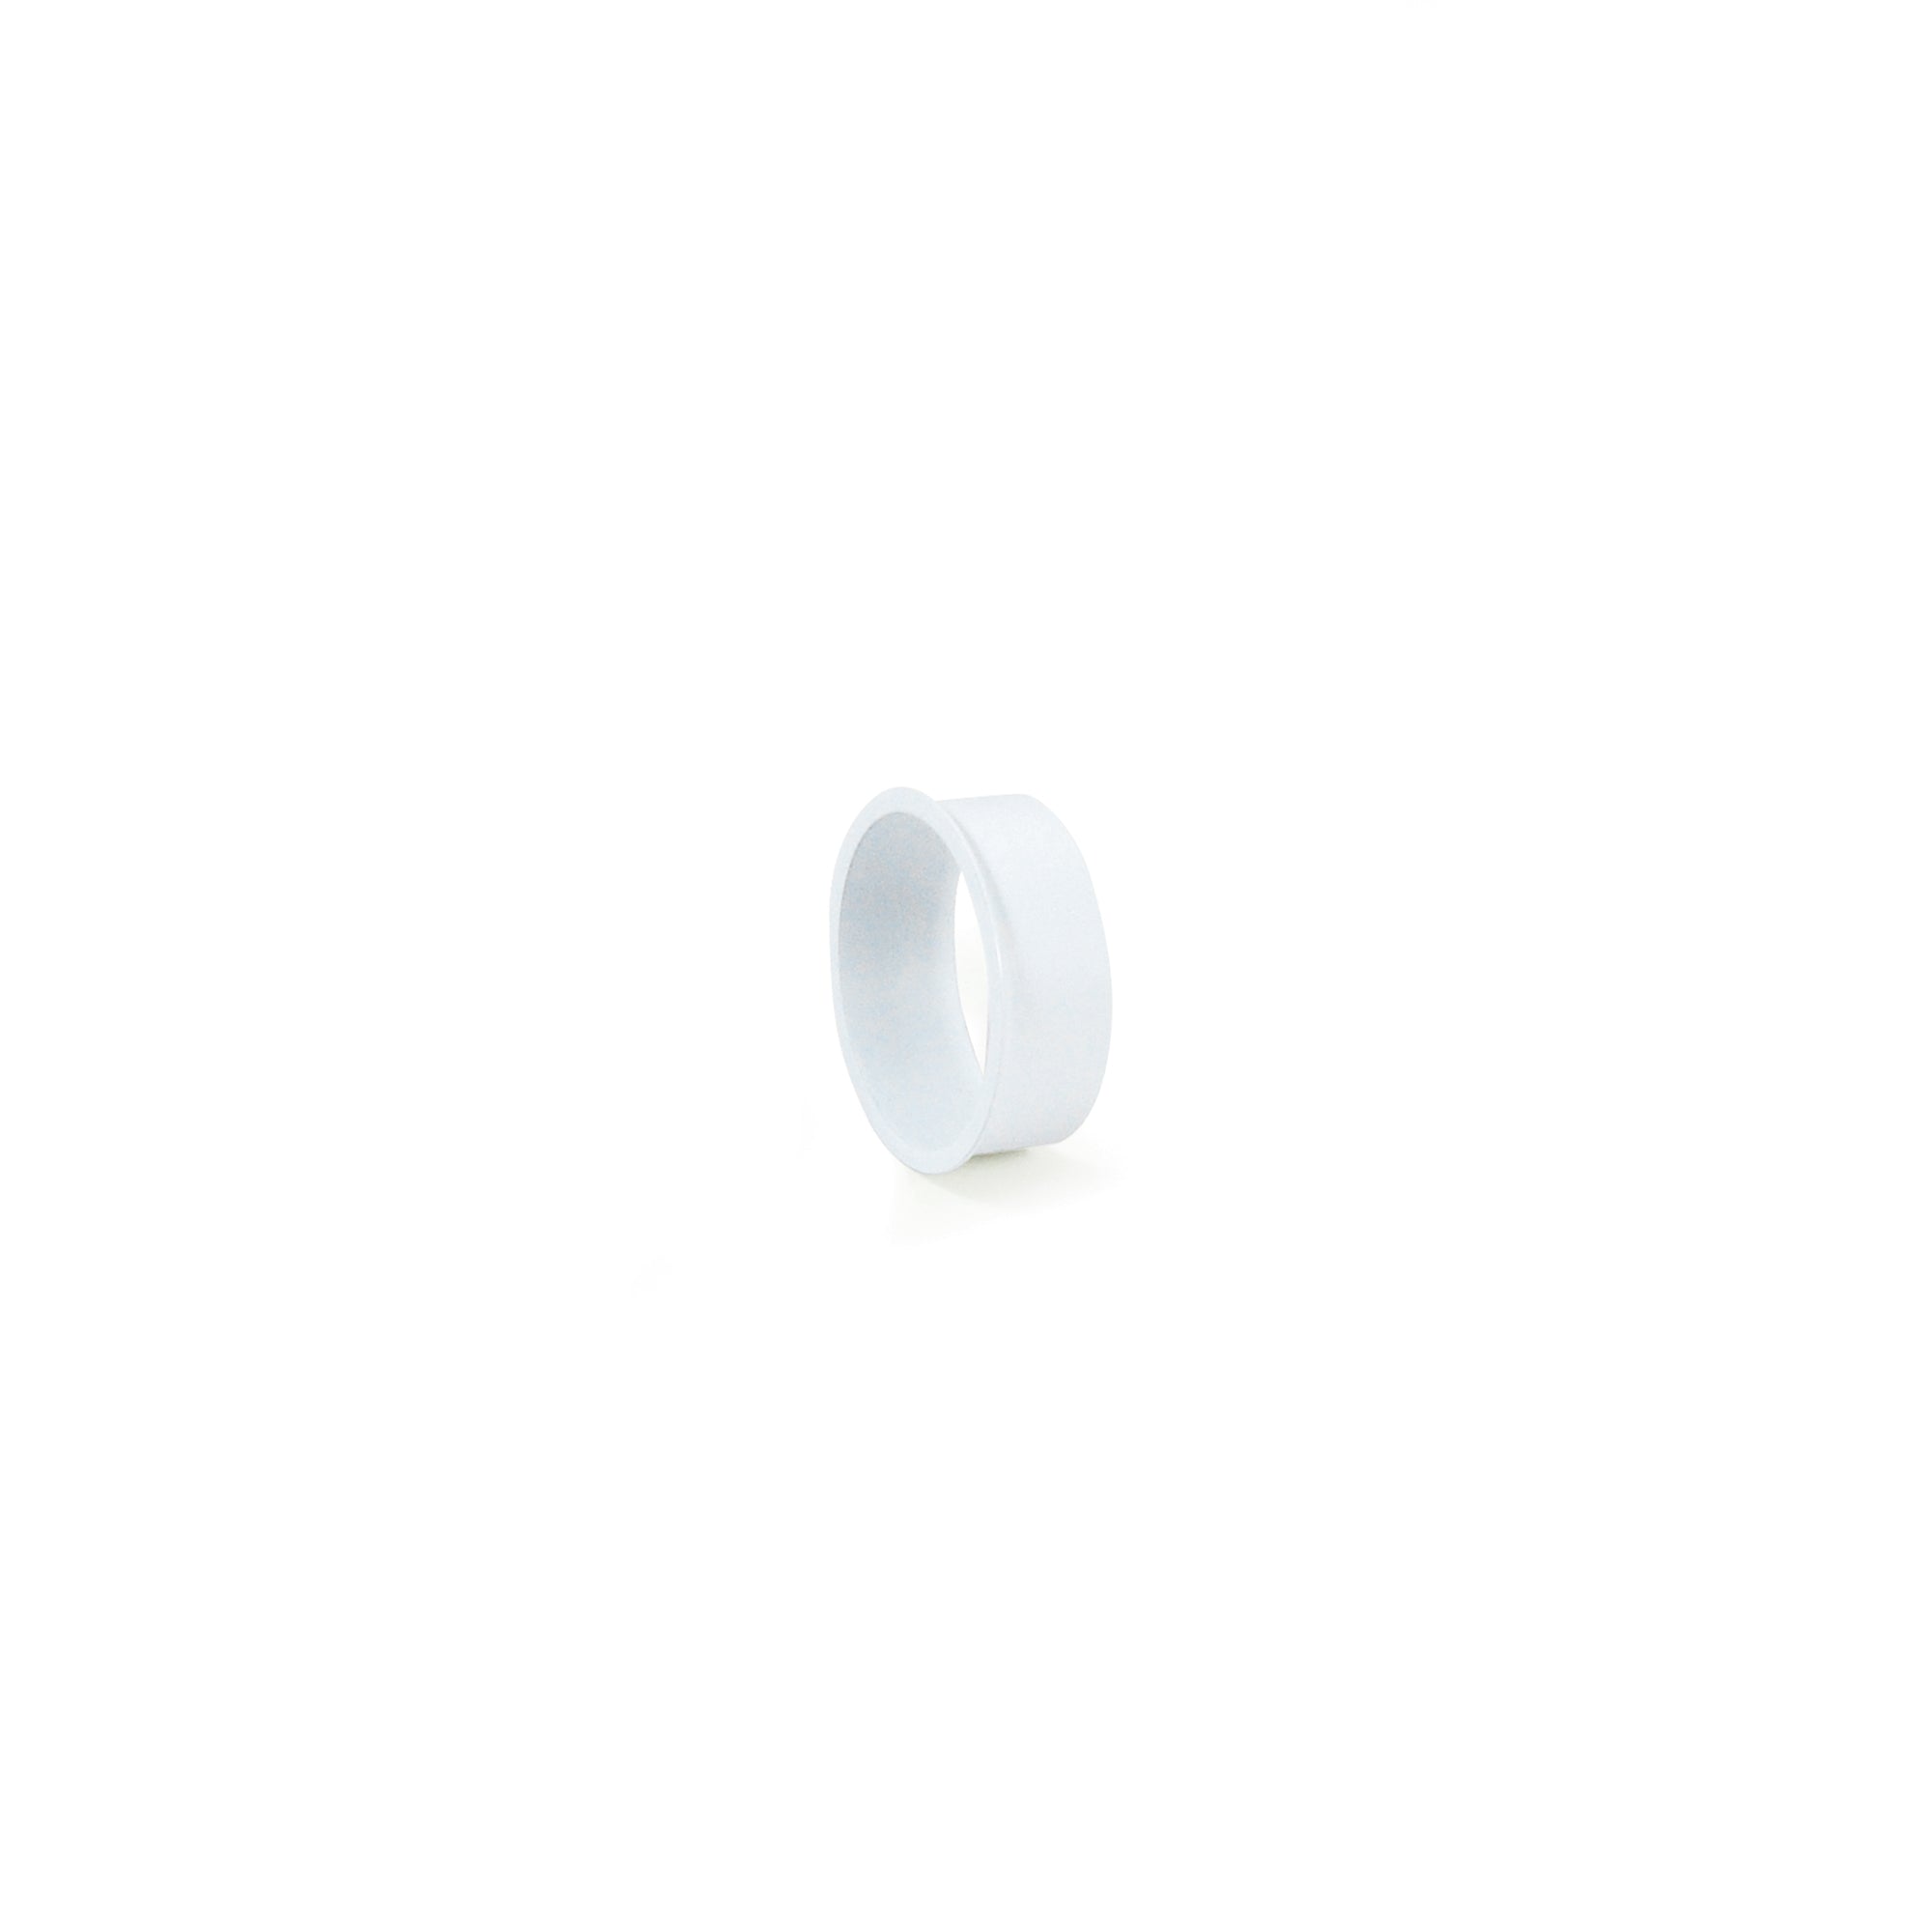 Nora Lighting NIO-AS14MPW - Recessed - 5/8 Inch Matte Powder White Opaque Snoot for 2 Inch & 4 Inch Iolite Trims